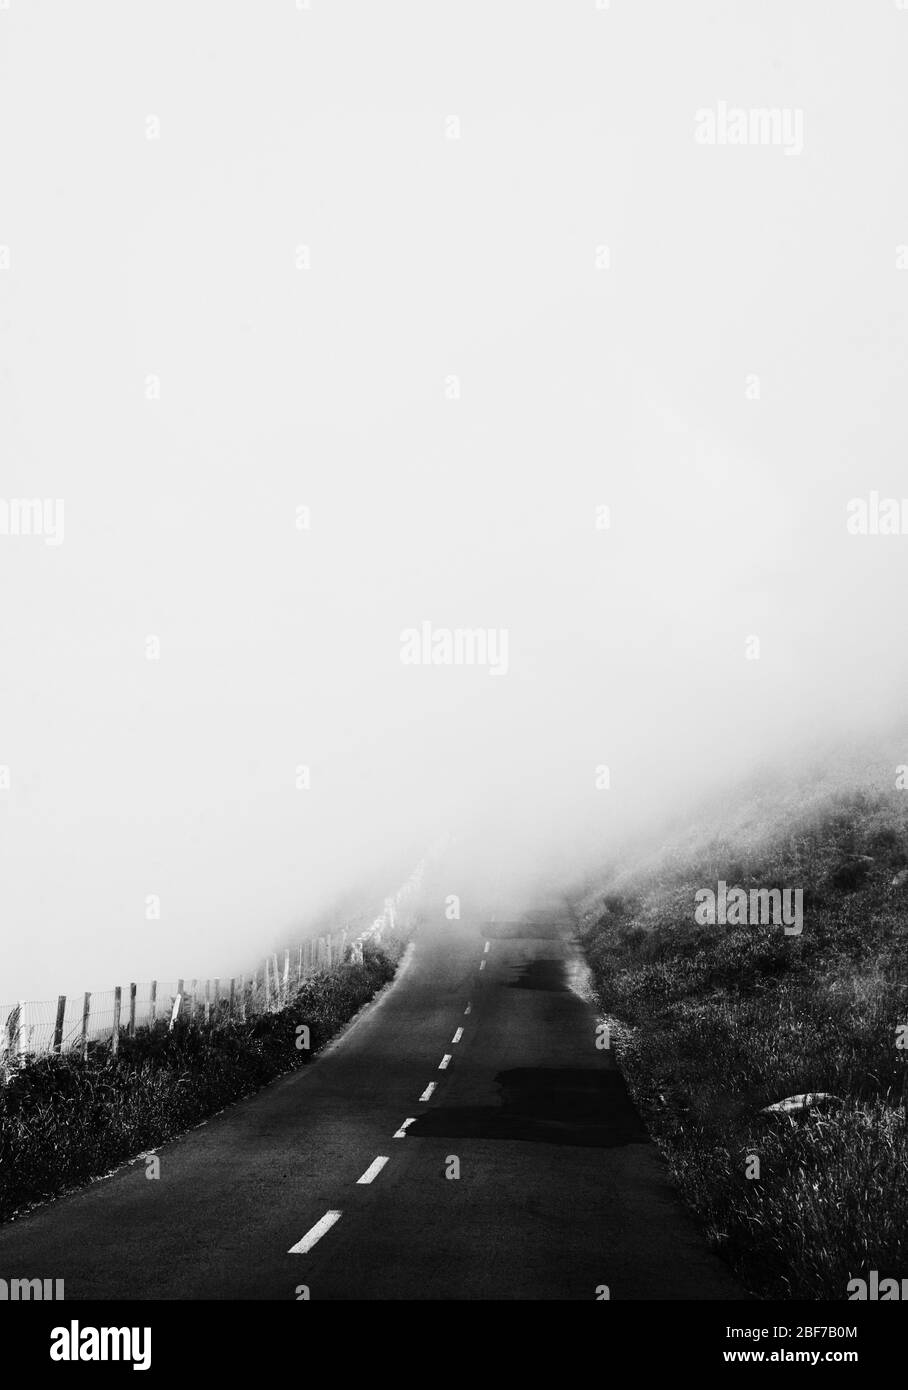 Empty rural road on a foggy day Stock Photo